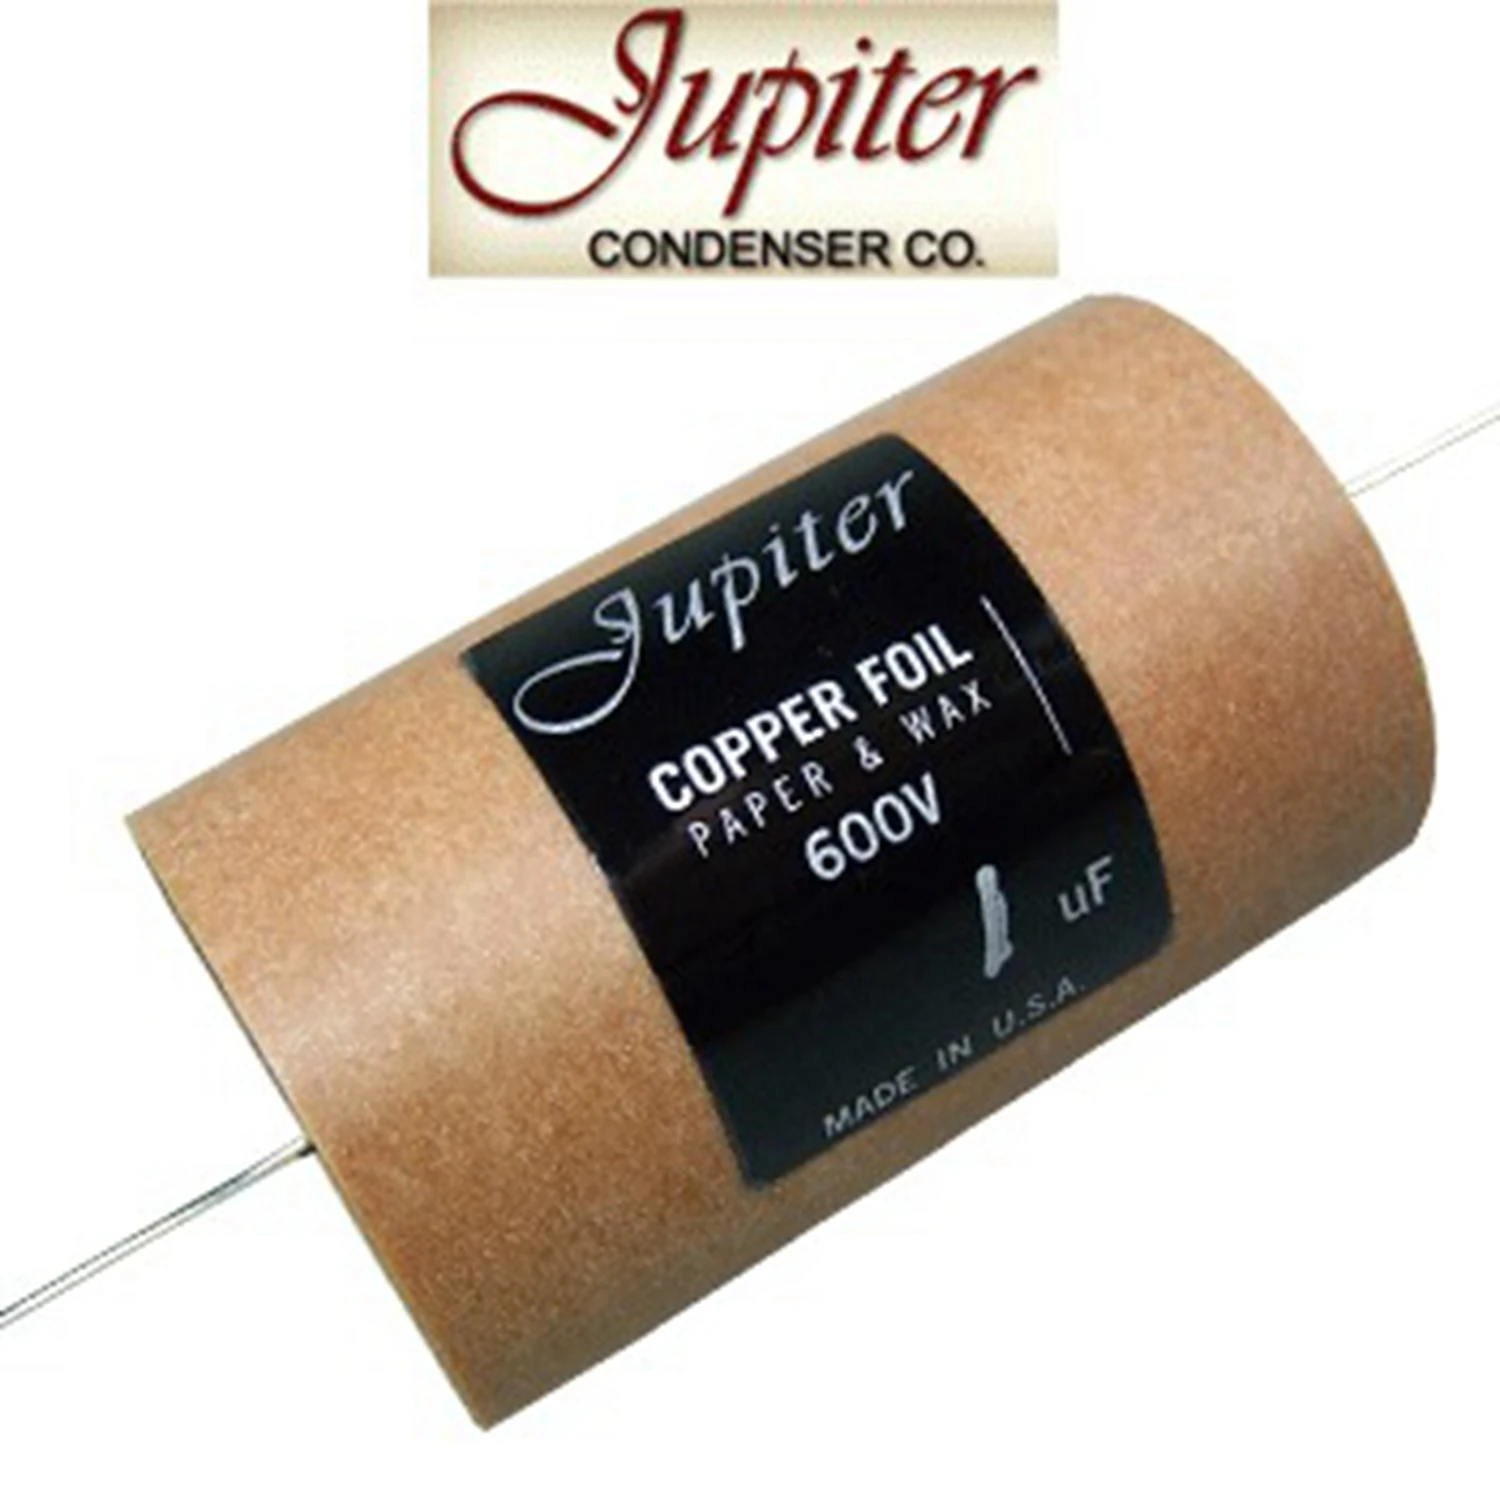 1pcs Original American jupiter Copper Foil Paper & Wax Capacitors series 5% 80C 100V/400V/600V Audio capacitor free shipping 1pcs of new original authentic bt169d unidirectional thyristor 400v 0 8a directly inserted into to 92